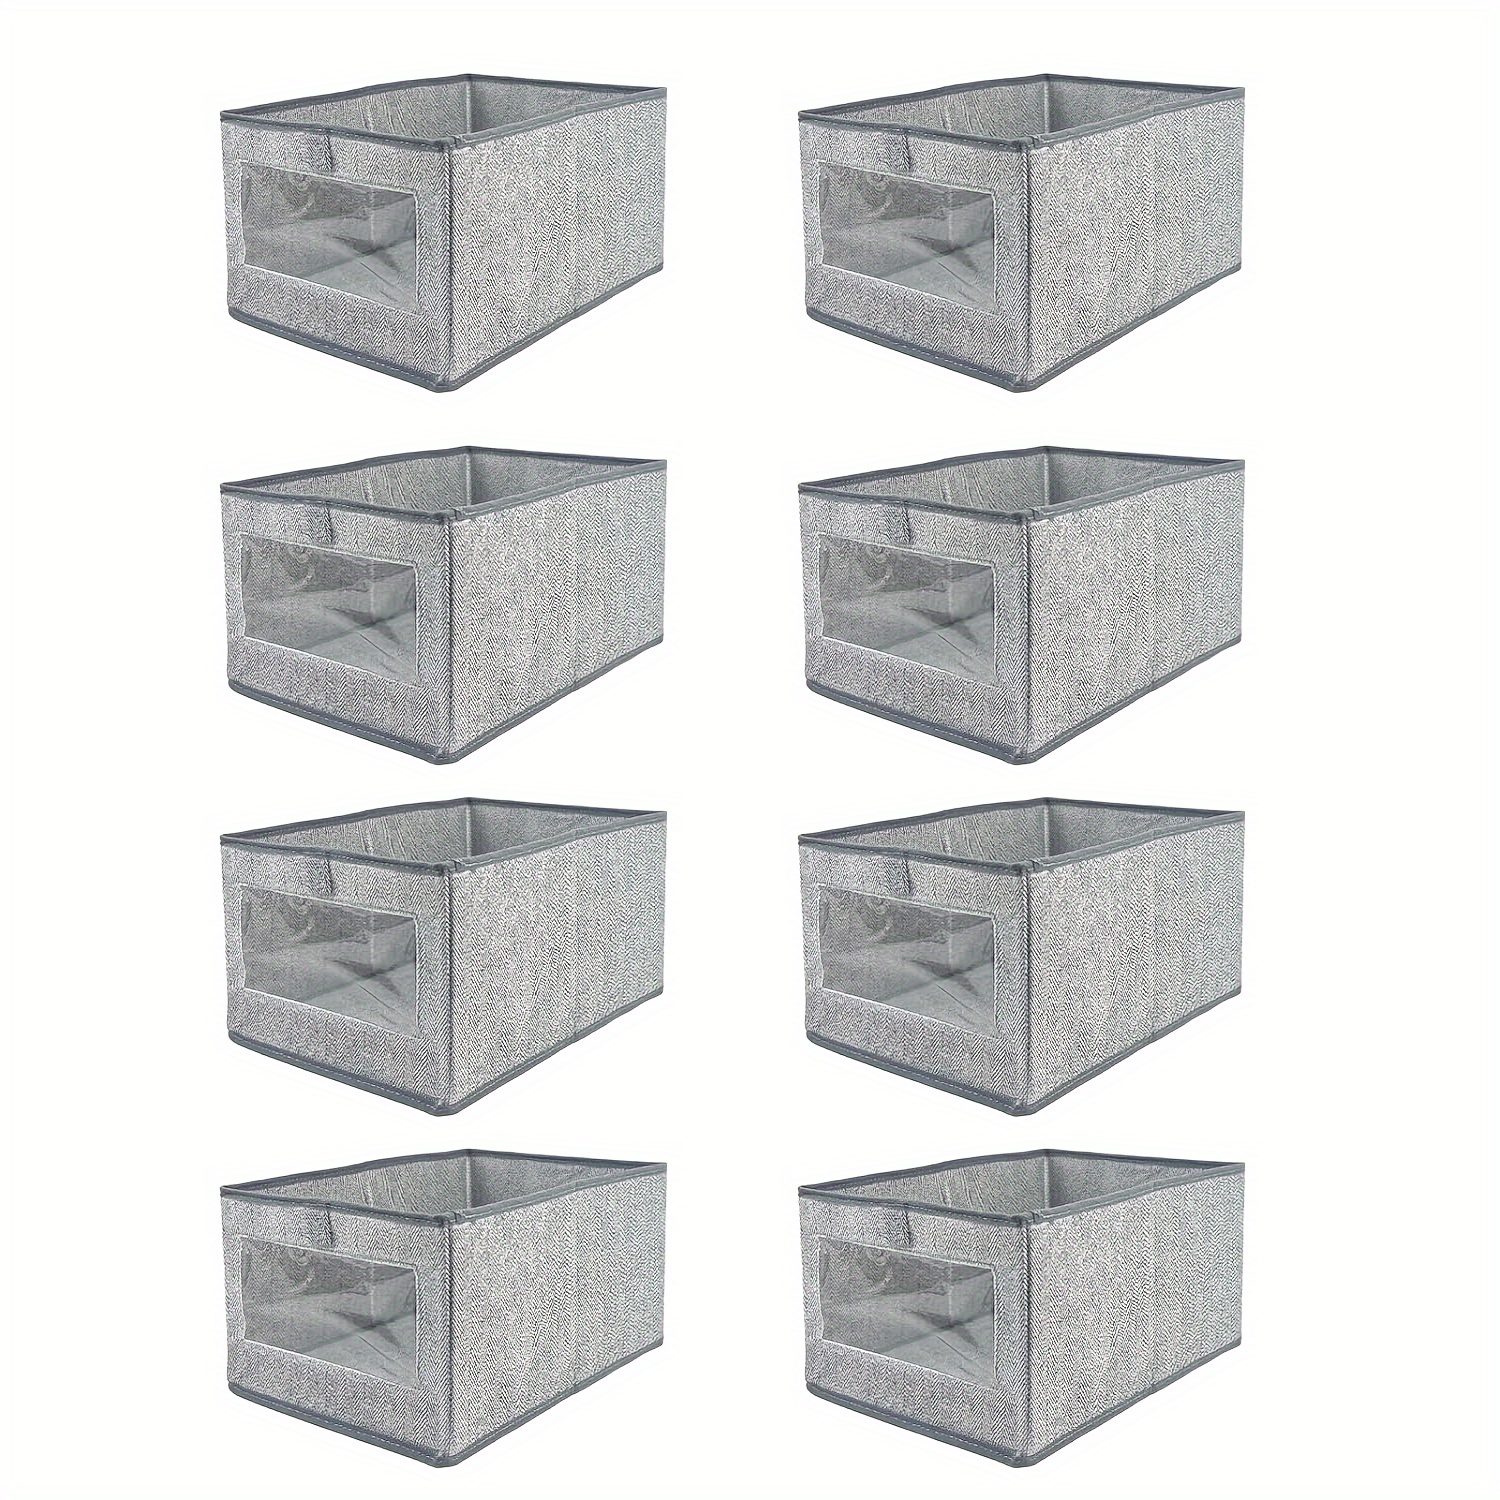 

Set Of 8 Grey Cube Storage Bins With Transparent Window, Foldable Fabric Baskets Boxes For Shelf And Closet Organization, Ideal For Nursery And Kids Room